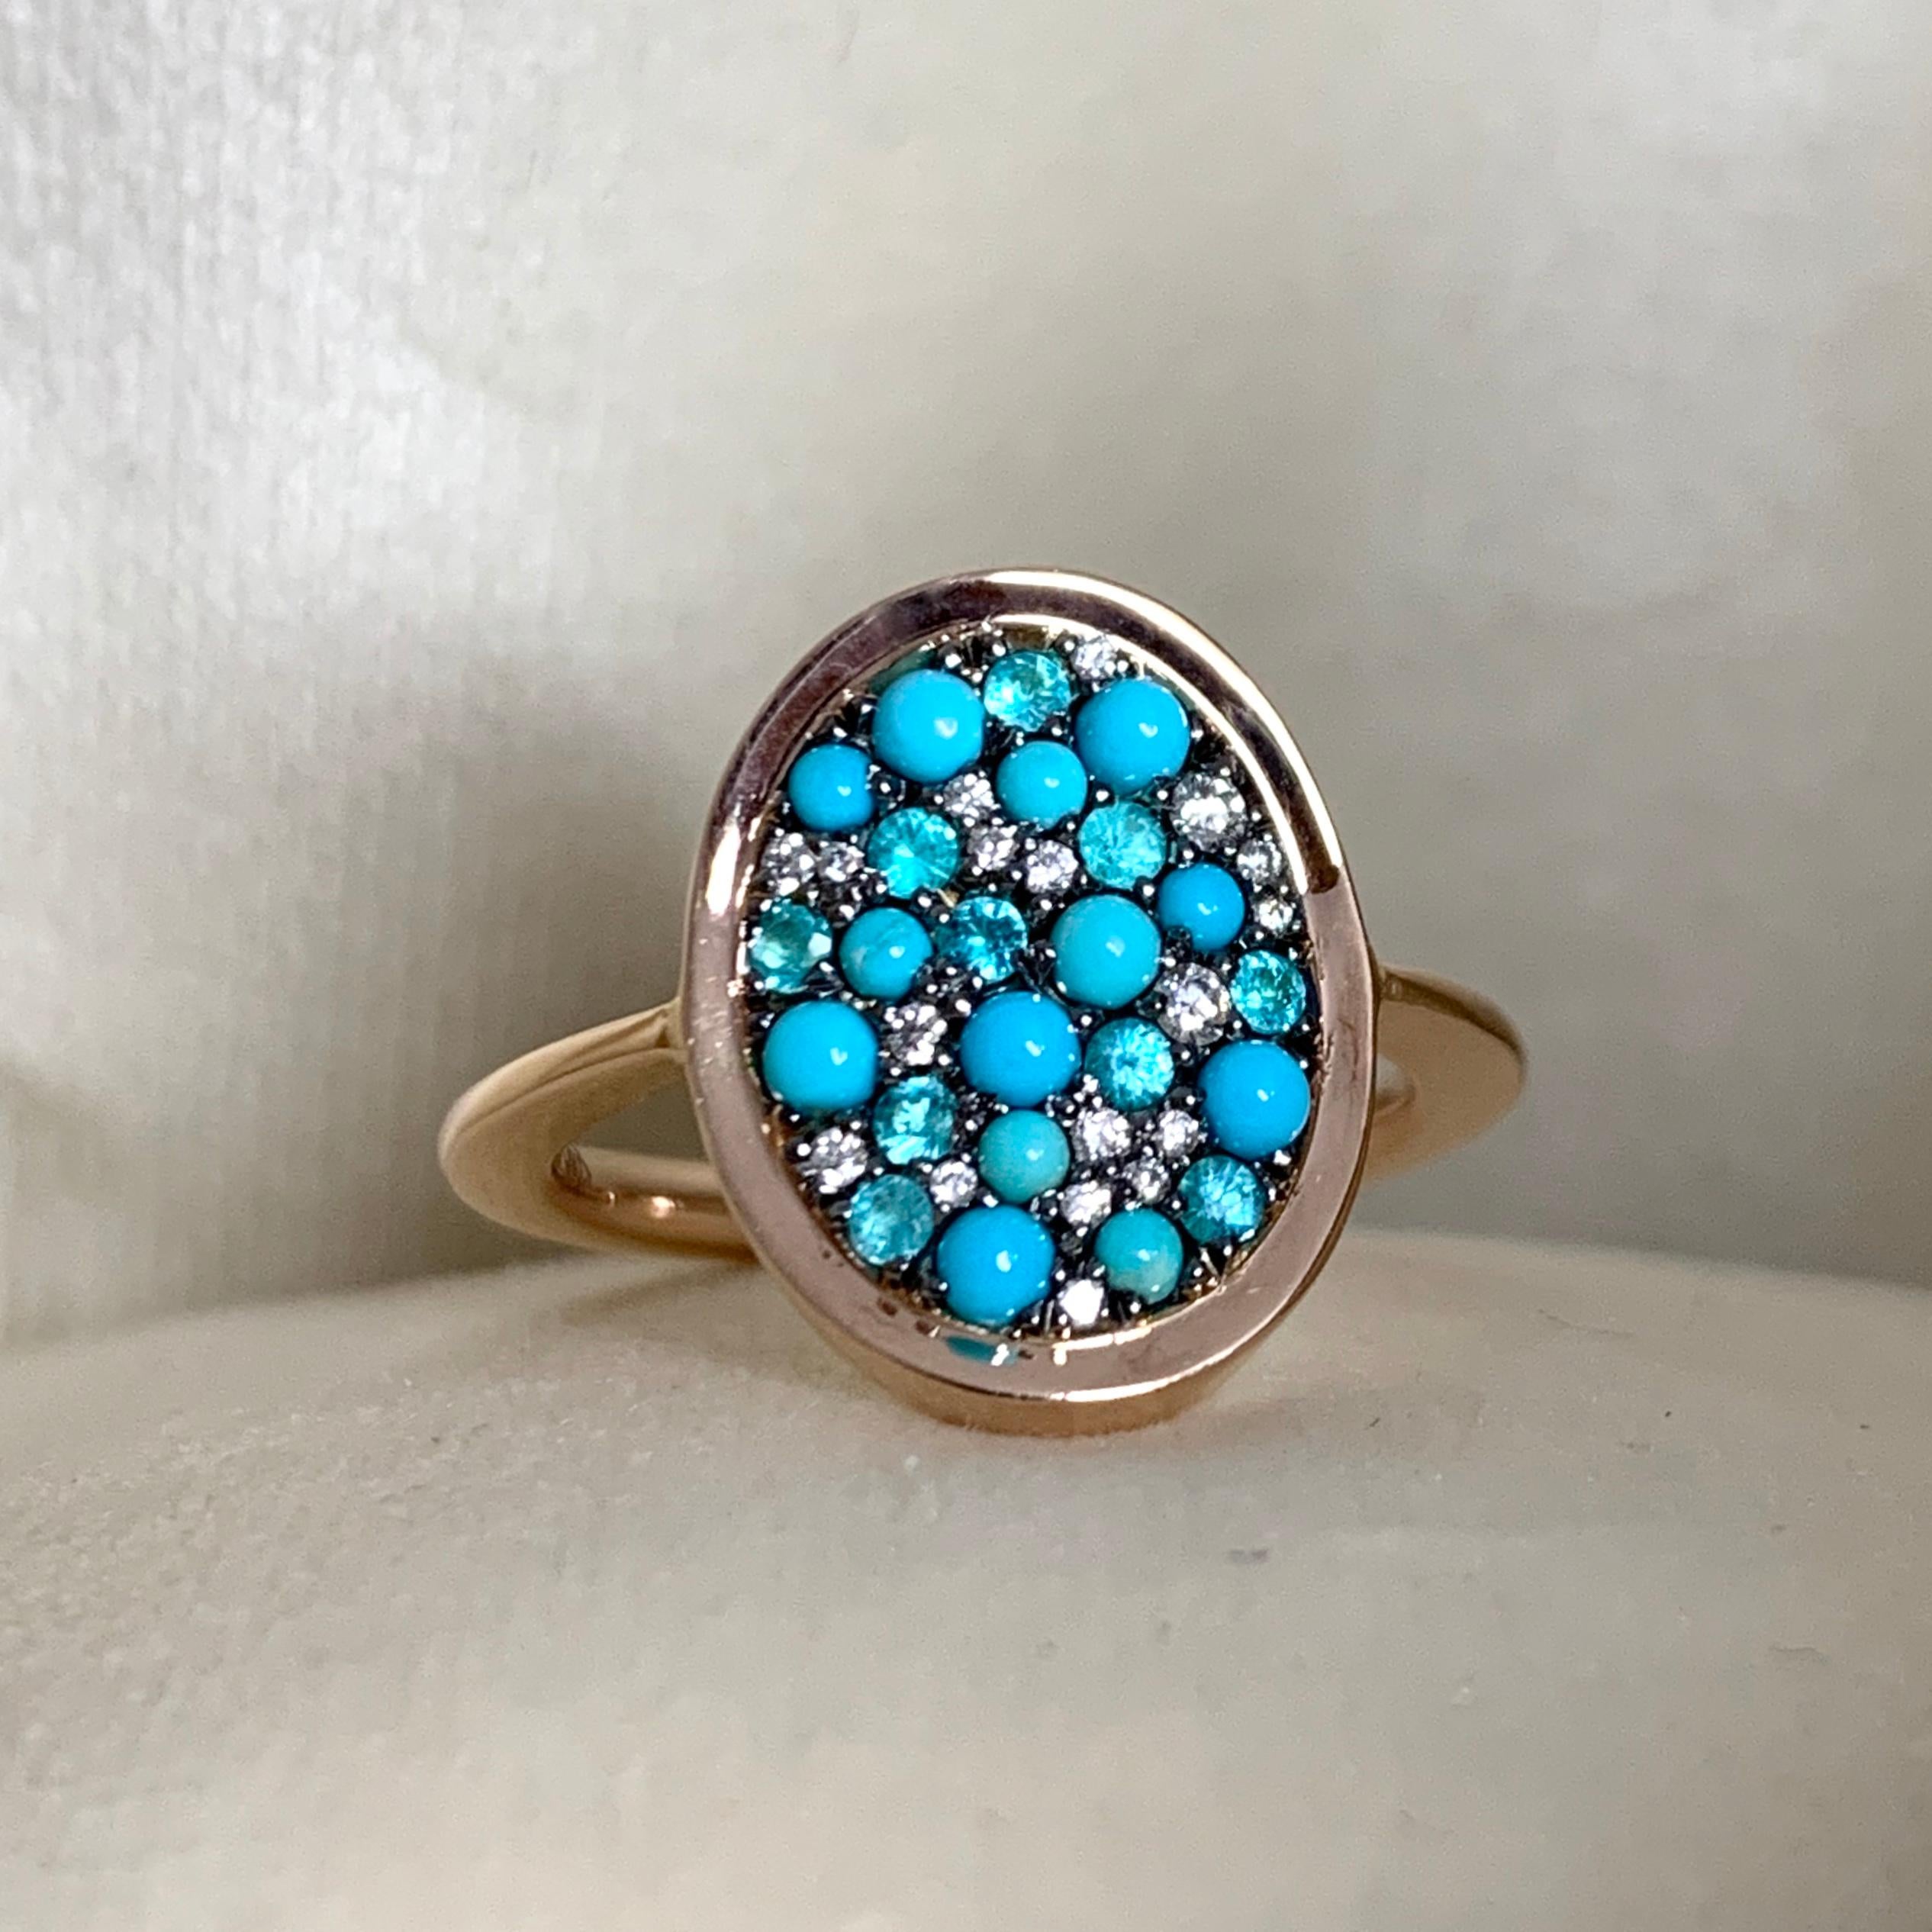 One of a kind ring in 18K Rose gold 4,5 g & blackened sterling silver (The stones are set on silver to create a black background for the stones) Pave set with Turquoise cabochons 0,42ct., Paraïba Tourmalines 0,15 ct., white DEGVVS brilliant-cut